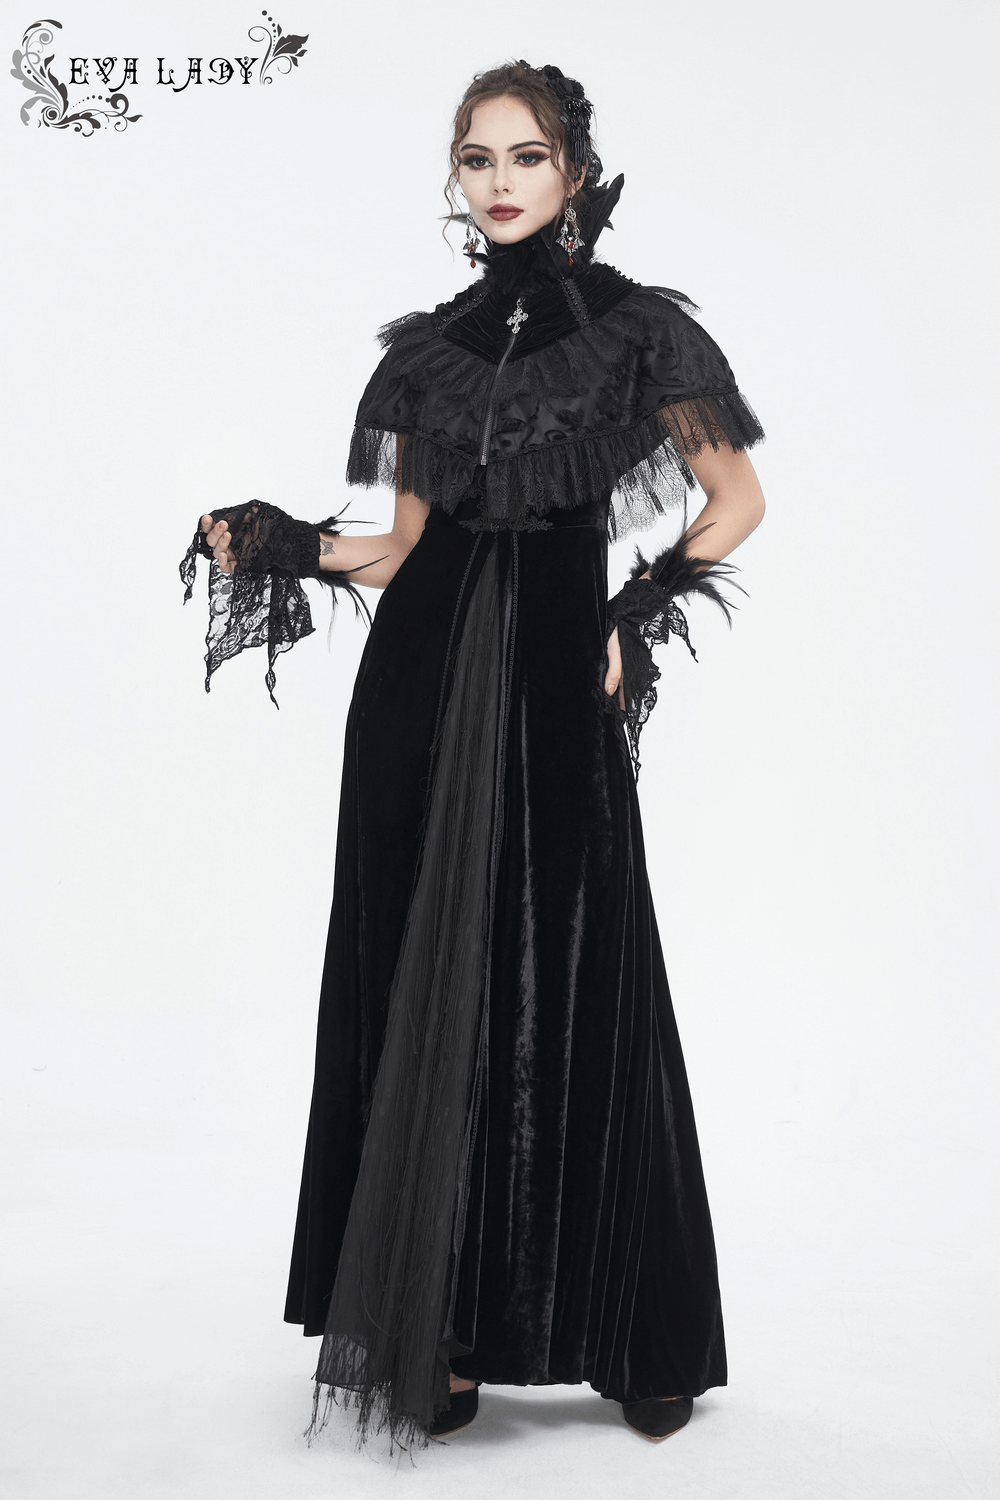 Gothic Women's Lace Fingerless Gloves with Feathers